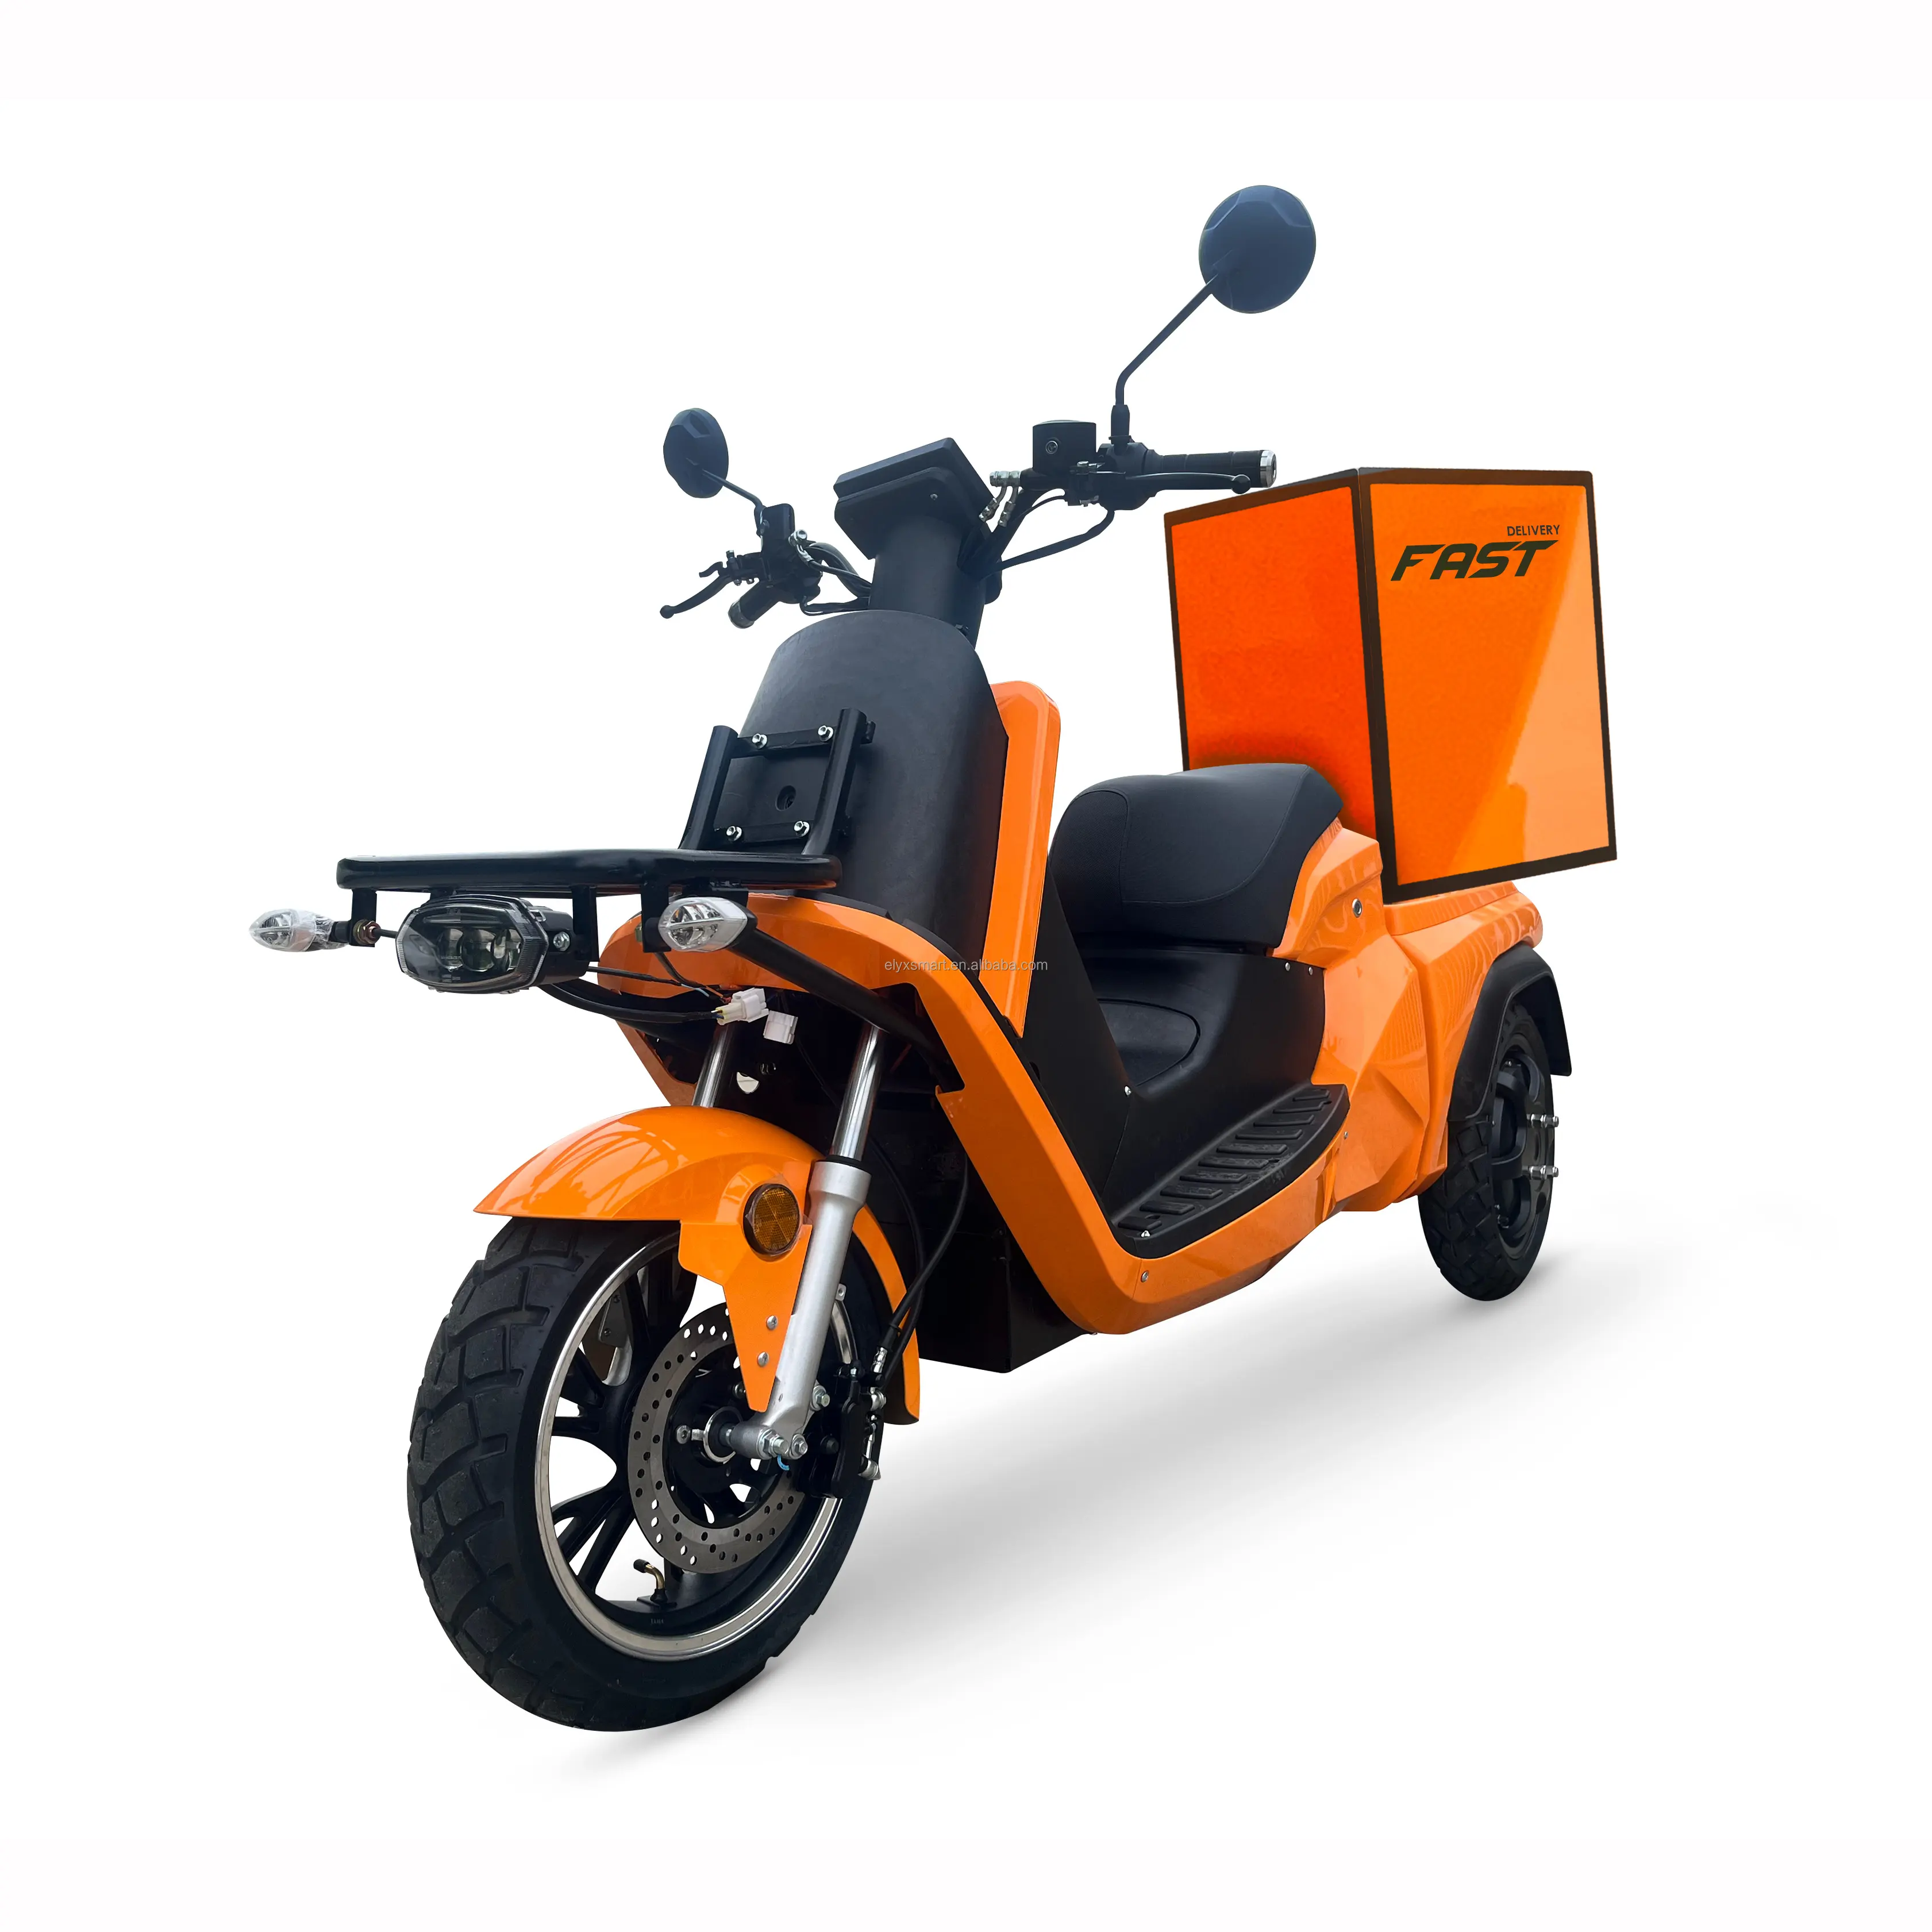 Hulk triciclo elettrico EEC COC Certified Utility Vehicle Mobility ScooterLithium Battery adulti scooter elettrici a 3 ruote